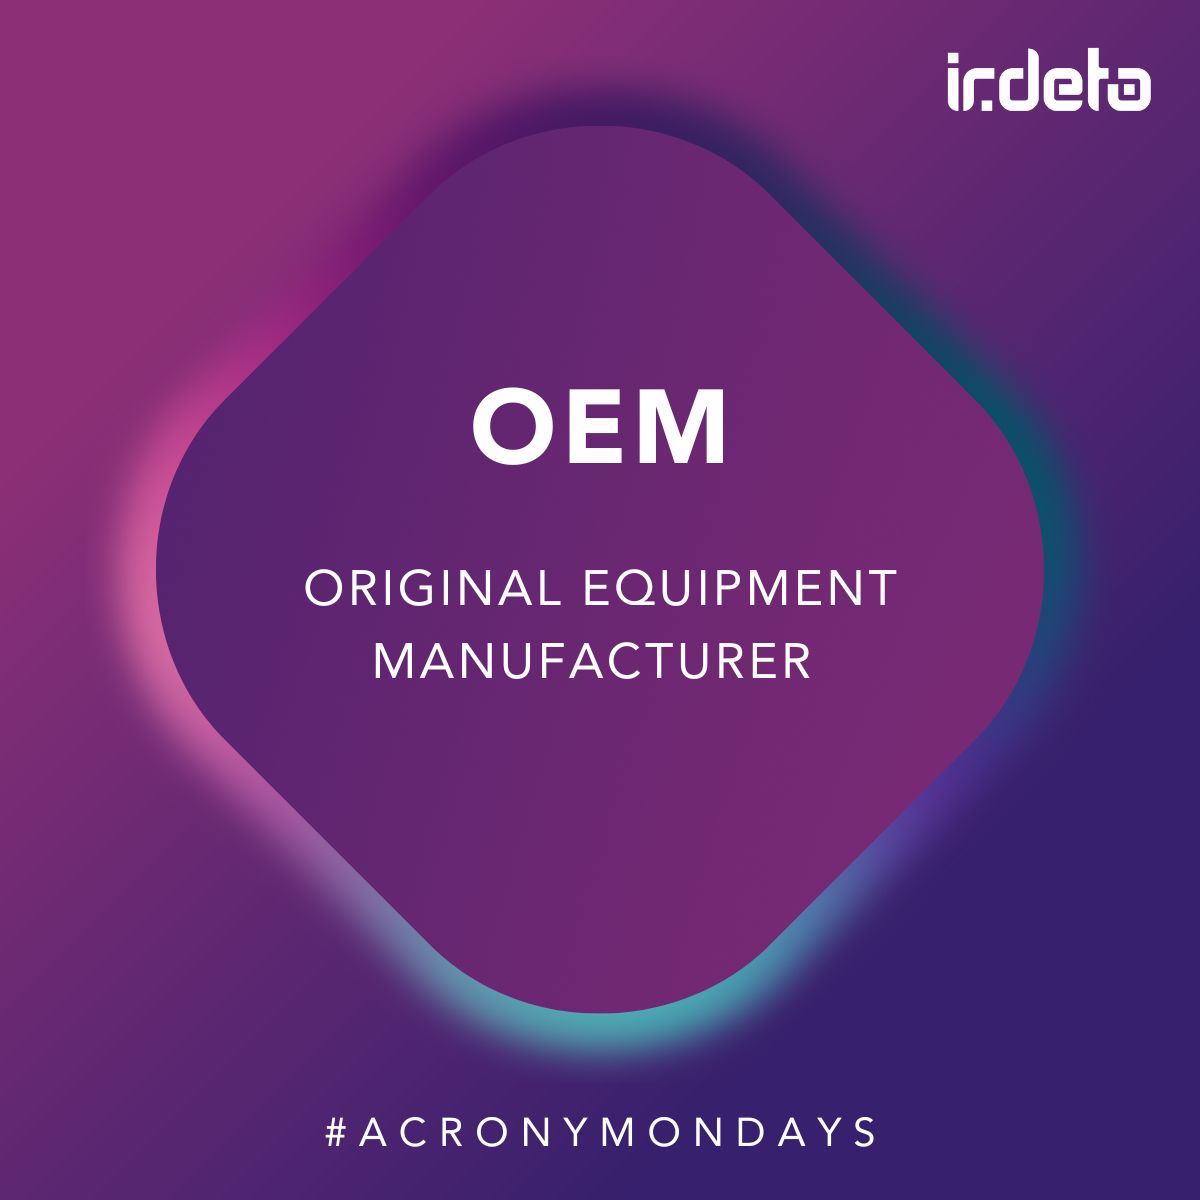 Original equipment manufacturer (#OEM) refers to an organization that makes devices from component parts bought from other organizations. OEMs commonly operate in the auto, medtech and IT industries. Read more about OEMs: irdeto.com/keystone-indus… #AcronyMondays #Cybersecurity